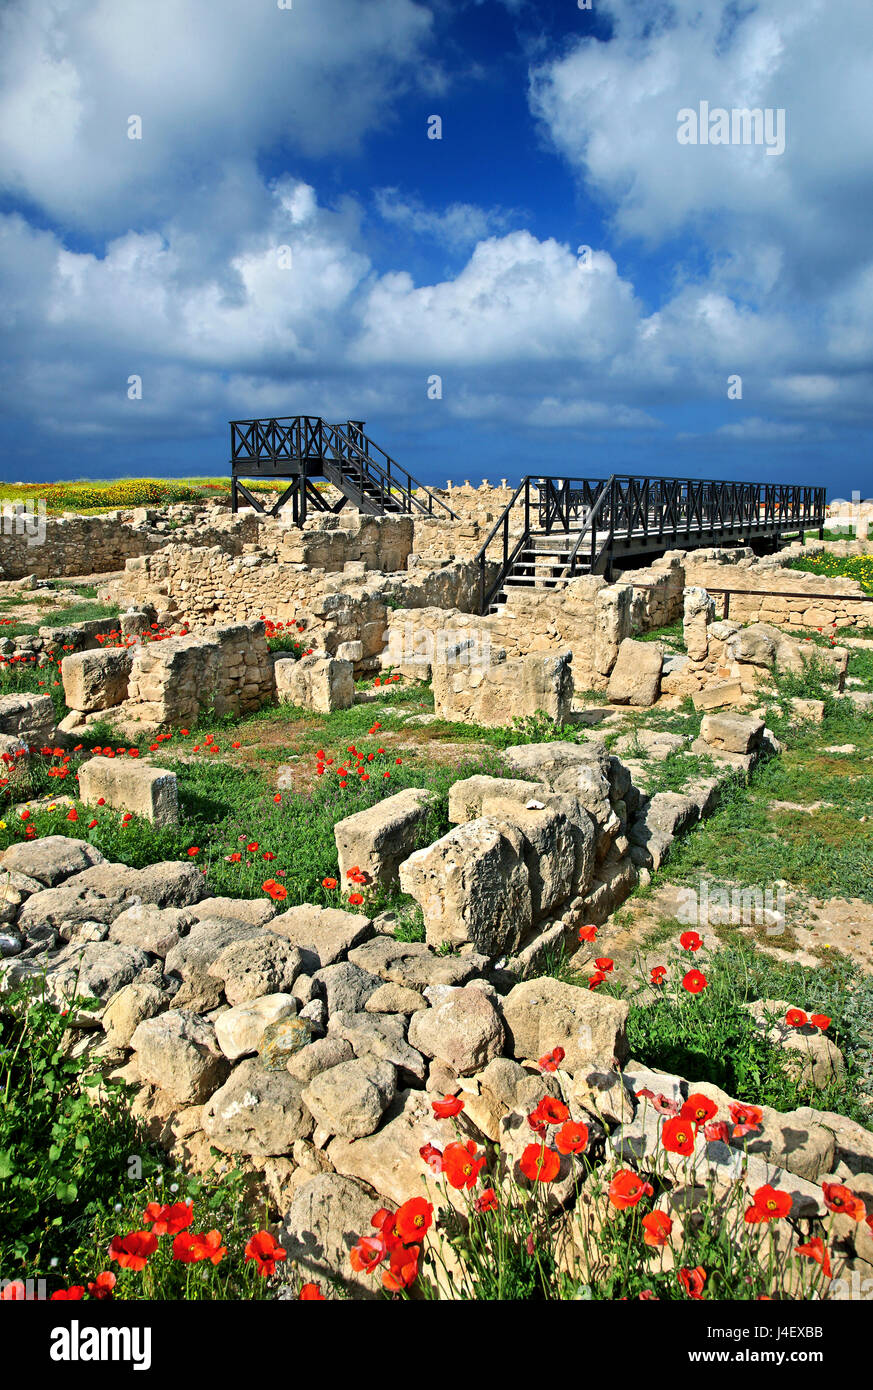 The 'House of Theseus' at the Archaeological Park of Paphos (UNESCO World Heritage Site) Cyprus. Stock Photo